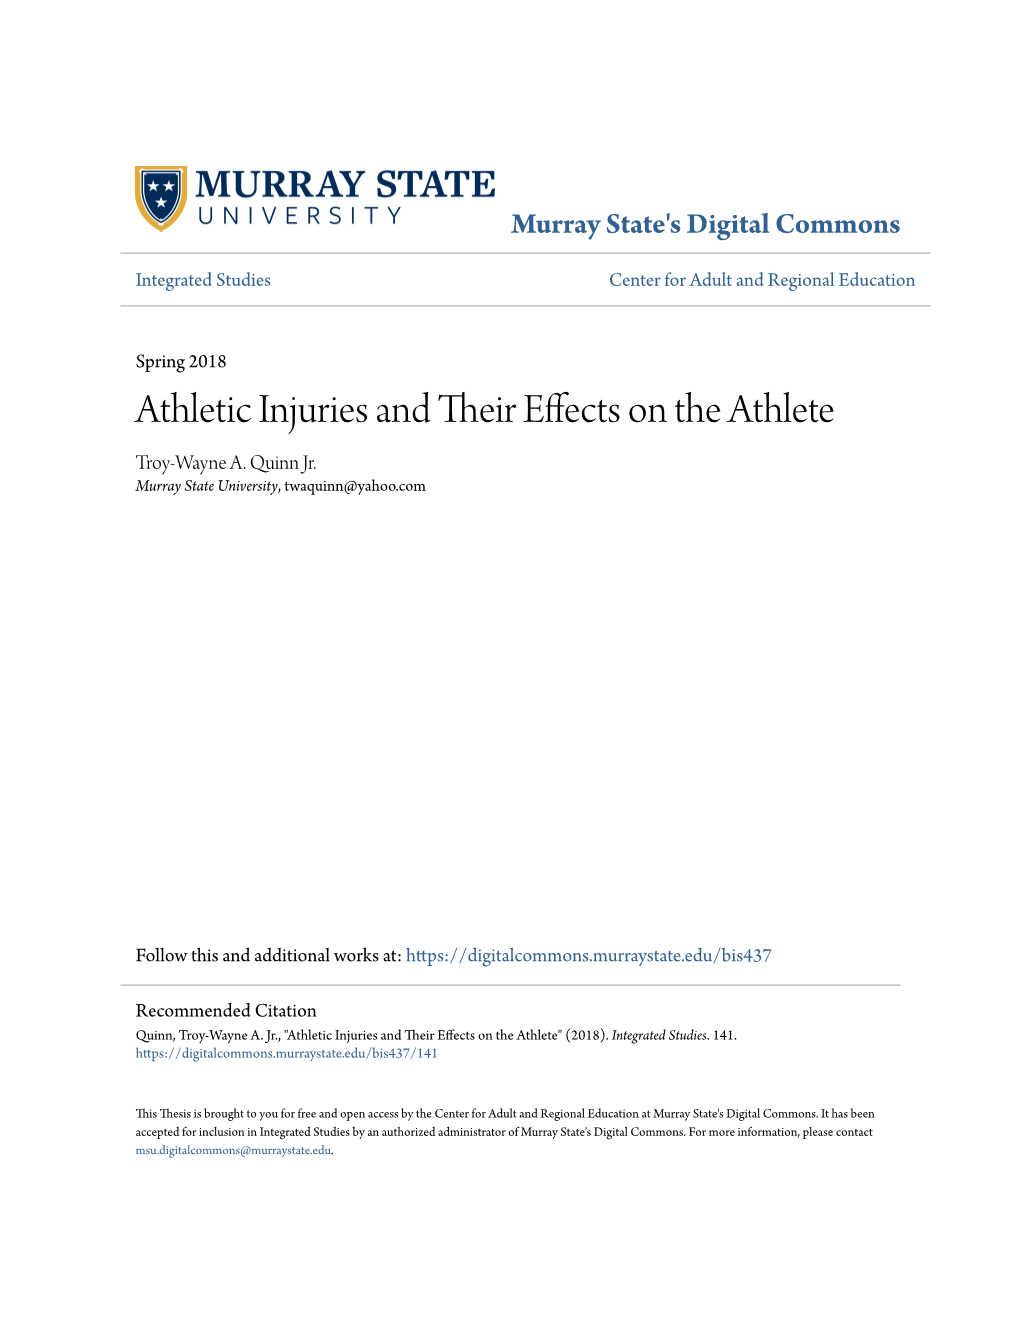 Athletic Injuries and Their Effects on the Athlete